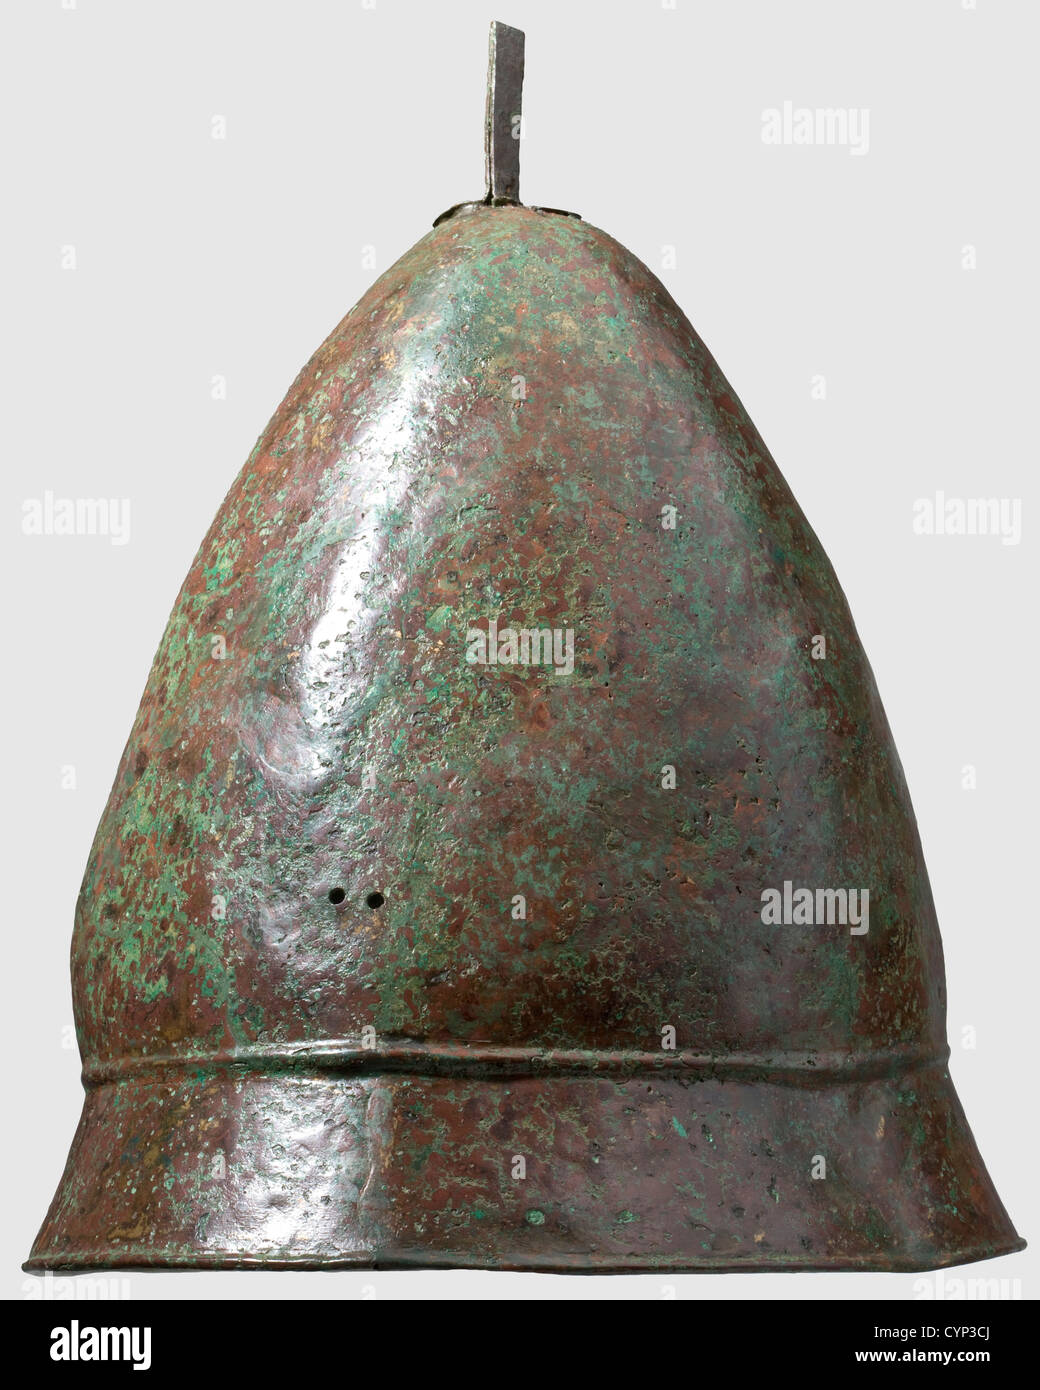 A bronze Pilos helmet, 4th century B.C. Tall, slightly bulging skull, the rim clearly offset by a bulge. Pairs of holes on the sides for fastening the chinstraps. Riveted plume holder on the flattened crown's apex. Height 29.5 cm. Reddish-brown to green patina, slightly deformed. The interior stabilised with fibreglass and resin. Restorations everywhere on the skull. Axel Guttmann Collection (AG 164), historic, historical, ancient world, ancient world, ancient times, object, objects, stills, clipping, cut out, cut-out, cut-outs, Additional-Rights-Clearences-Not Available Stock Photo